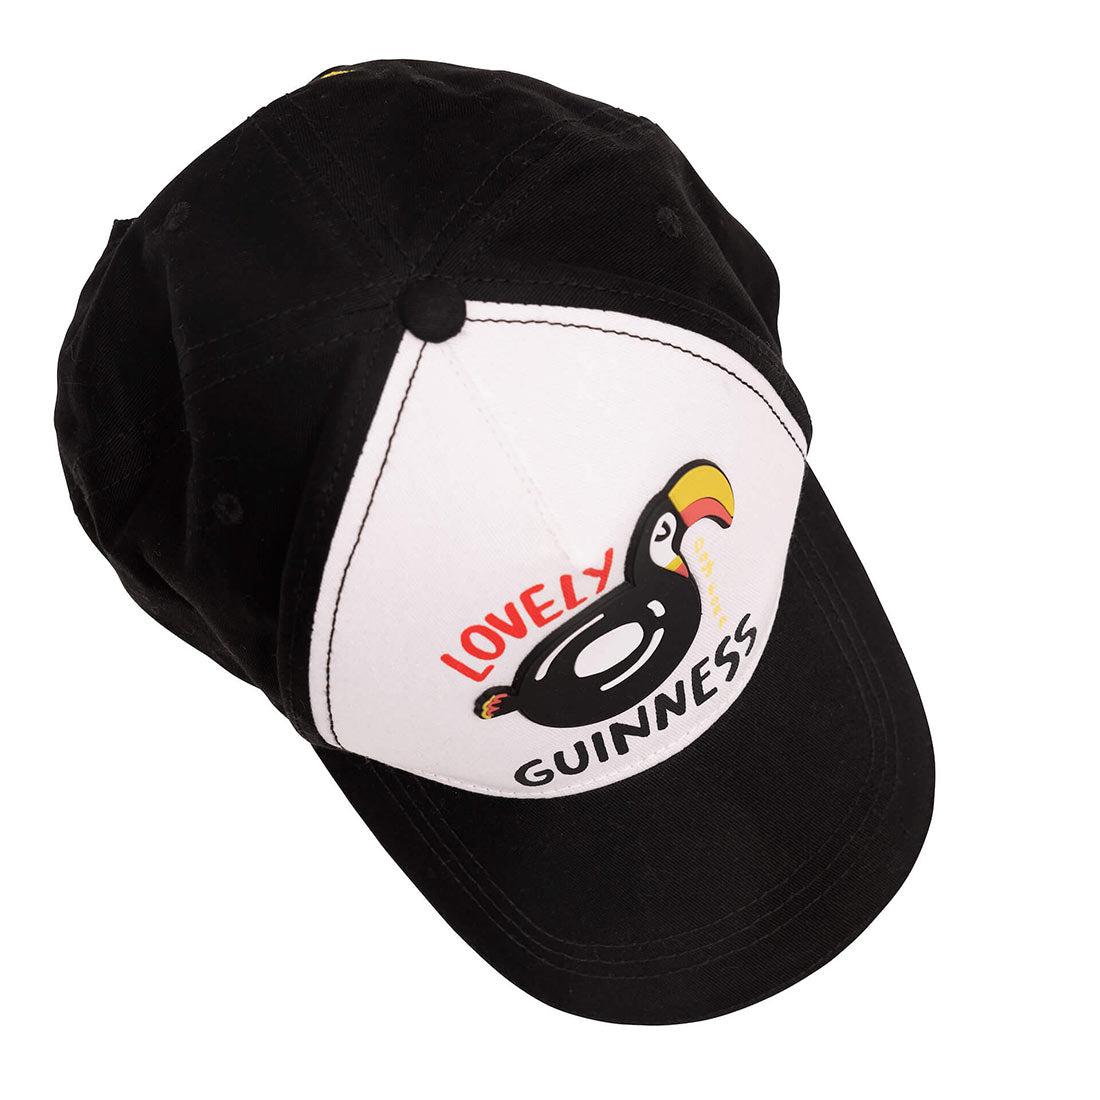 A FATTI BURKE "LOVELY DAY FOR A GUINNESS" TOUCAN BASEBALL CAP, designed by Fatti Burke, featuring a black and white summer-style baseball cap with a toucan on it.